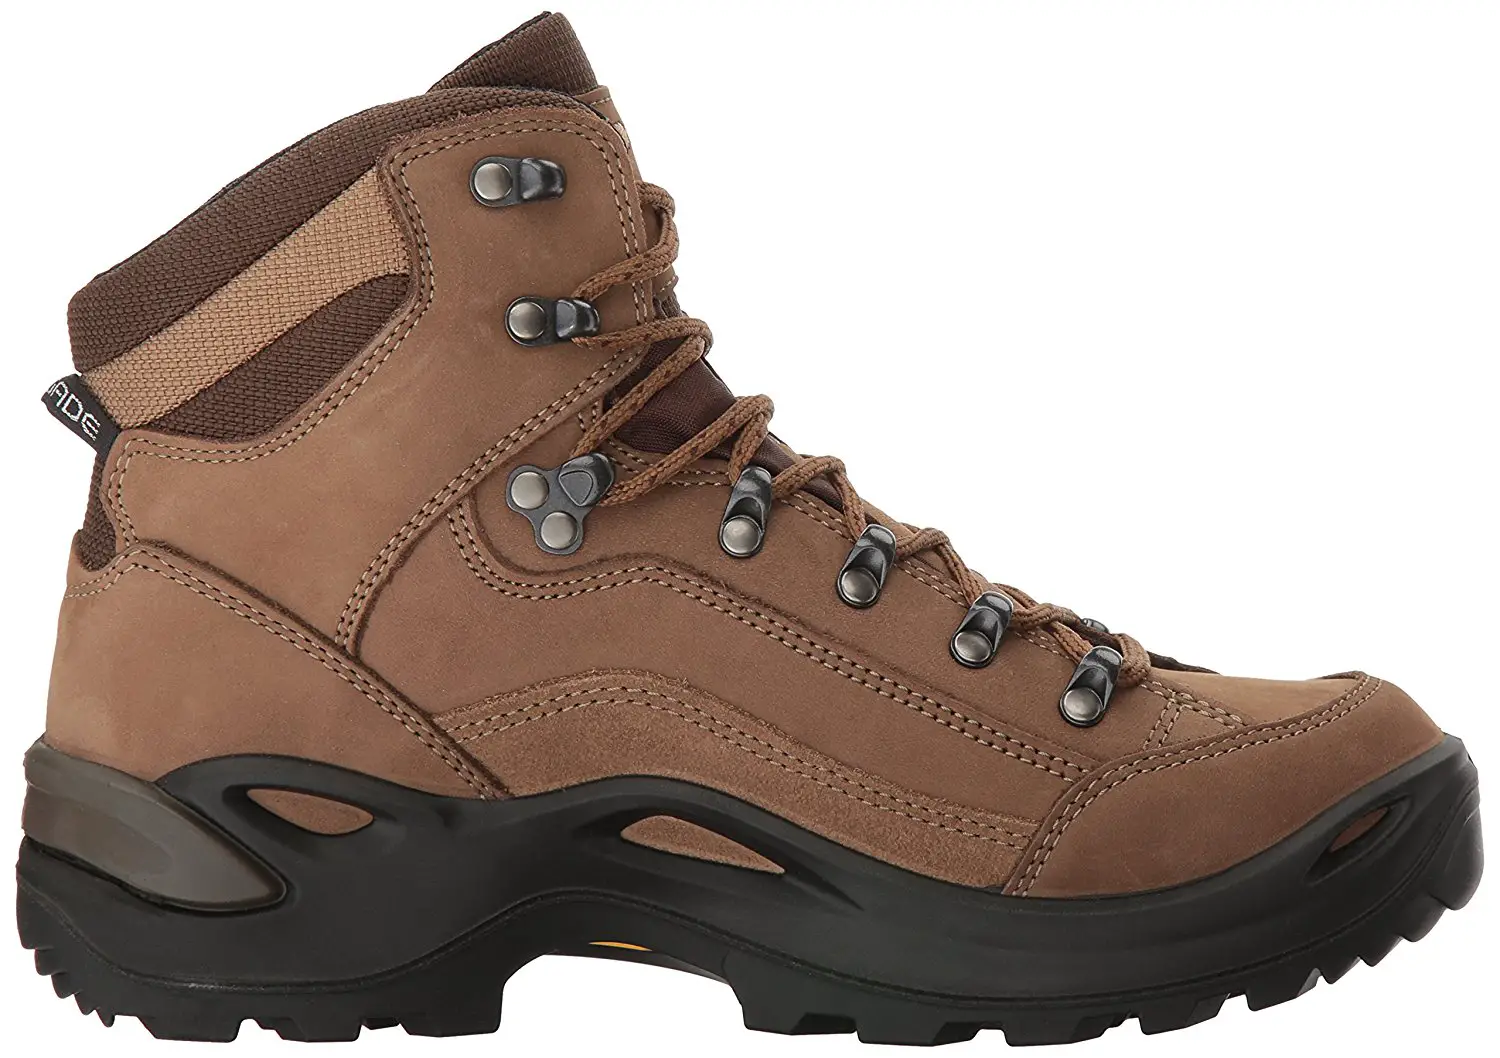 Side view of the Lowa Renegade GTX hiking boot